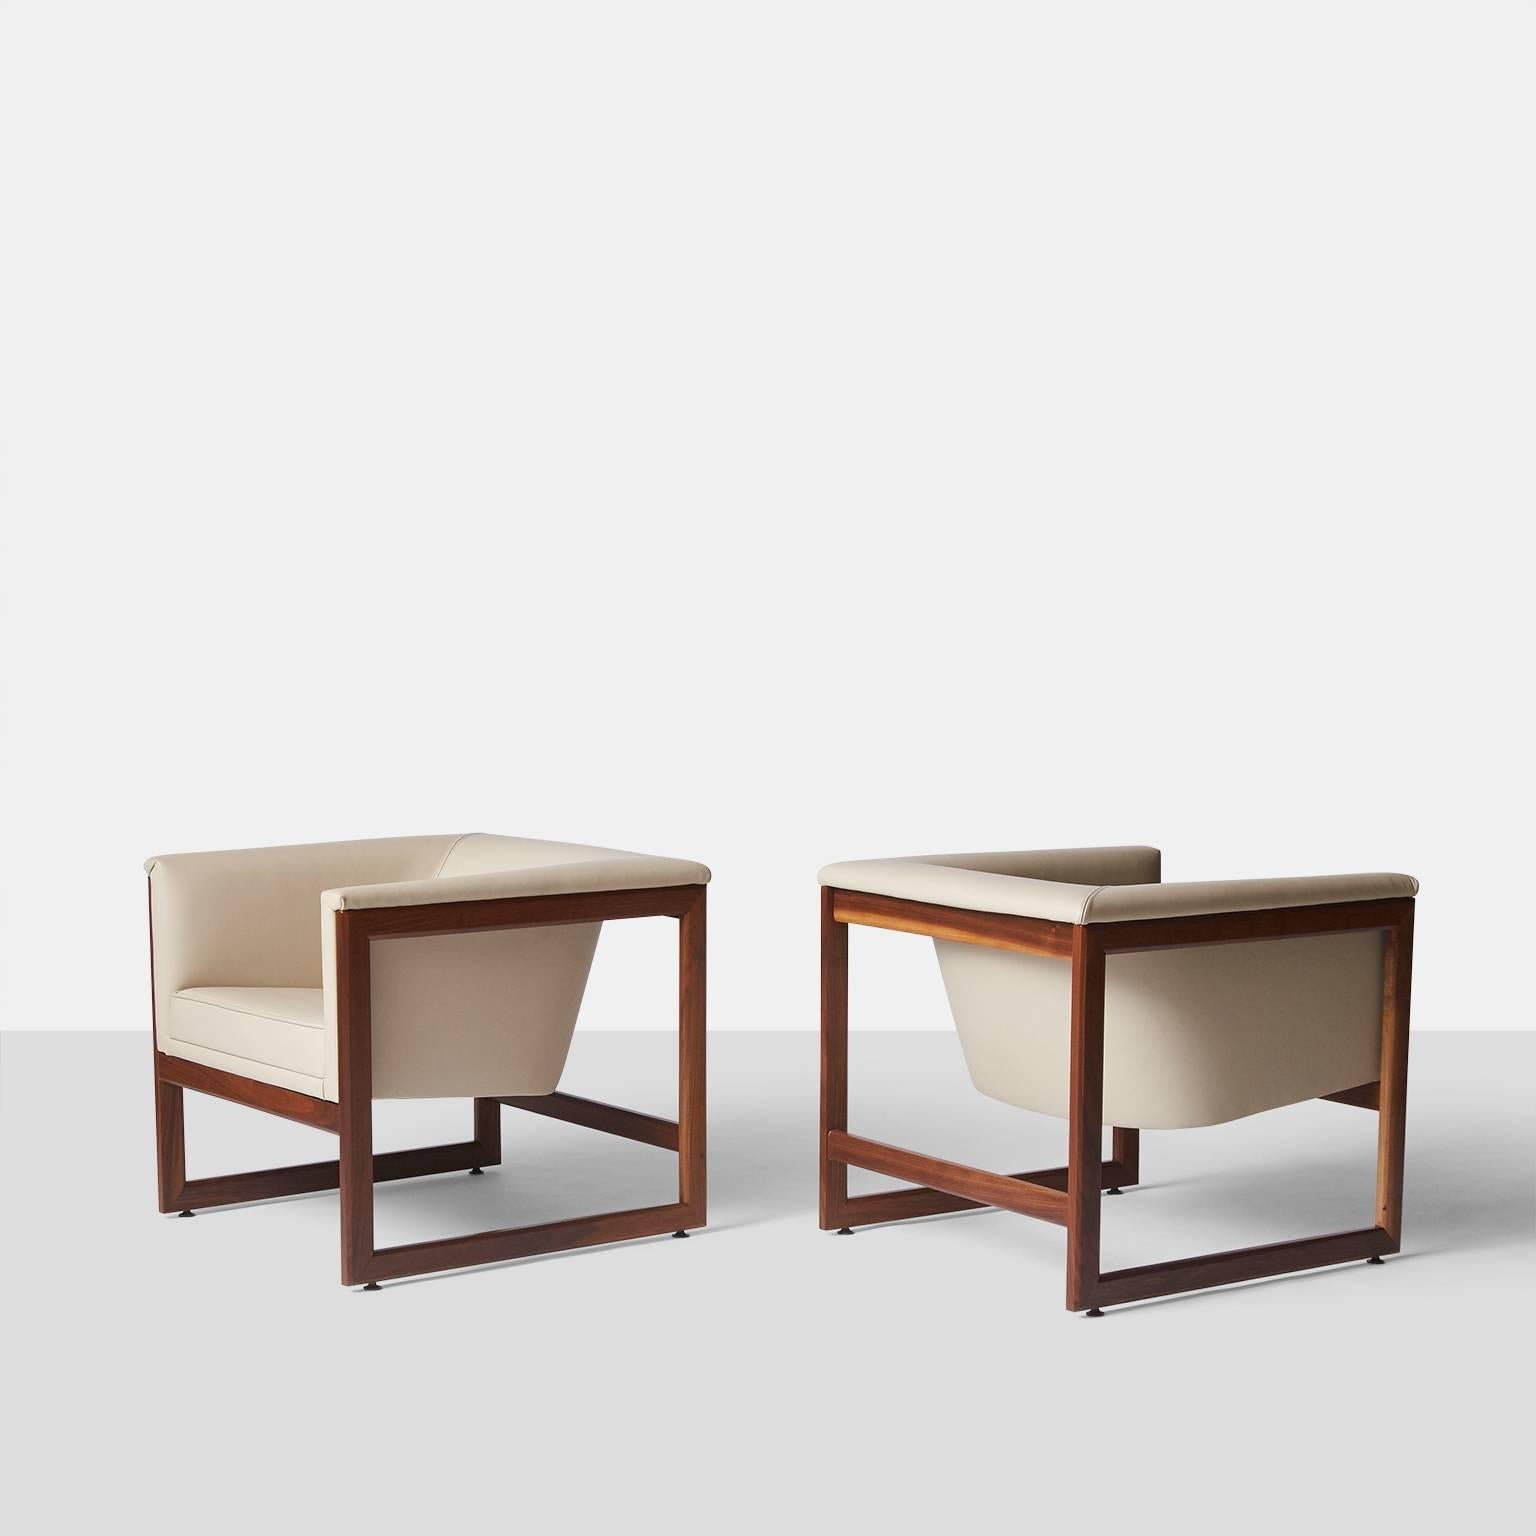 A pair of floating cube chairs by Milo Baughman upholstered in a luxurious ivory leather over a walnut frame.